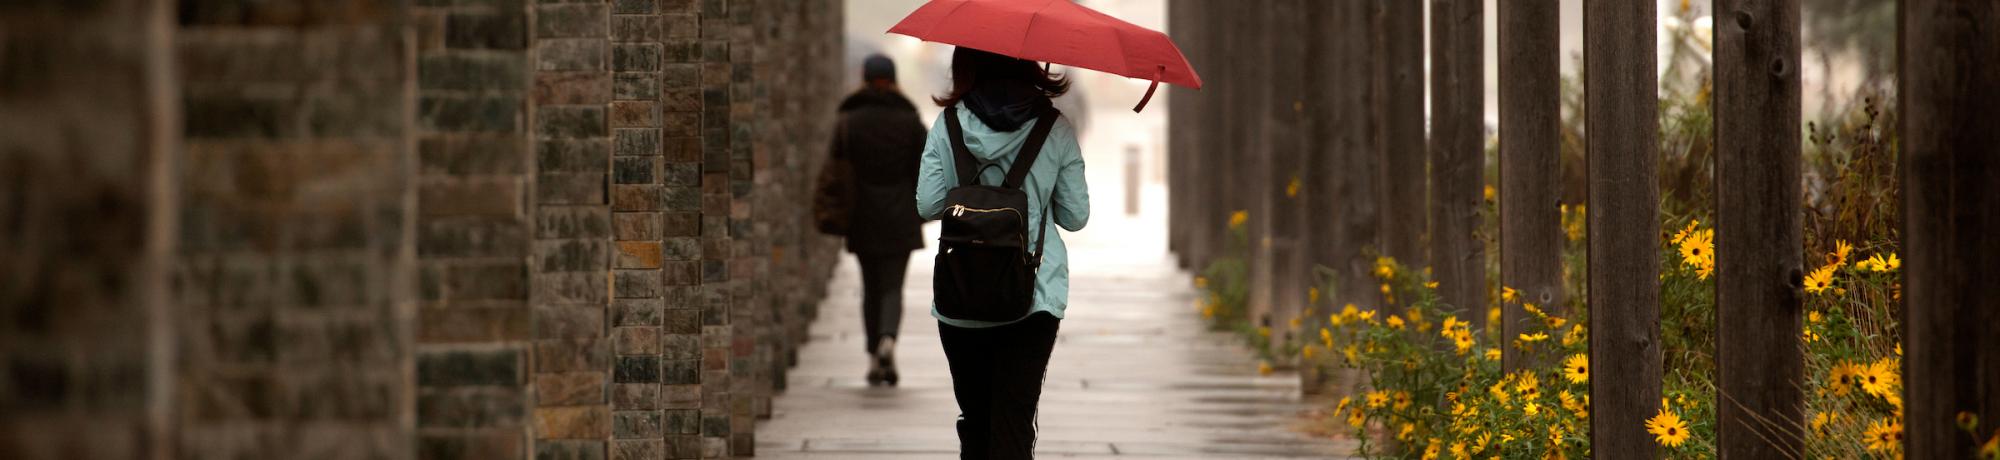 Student walking with pink umbrella